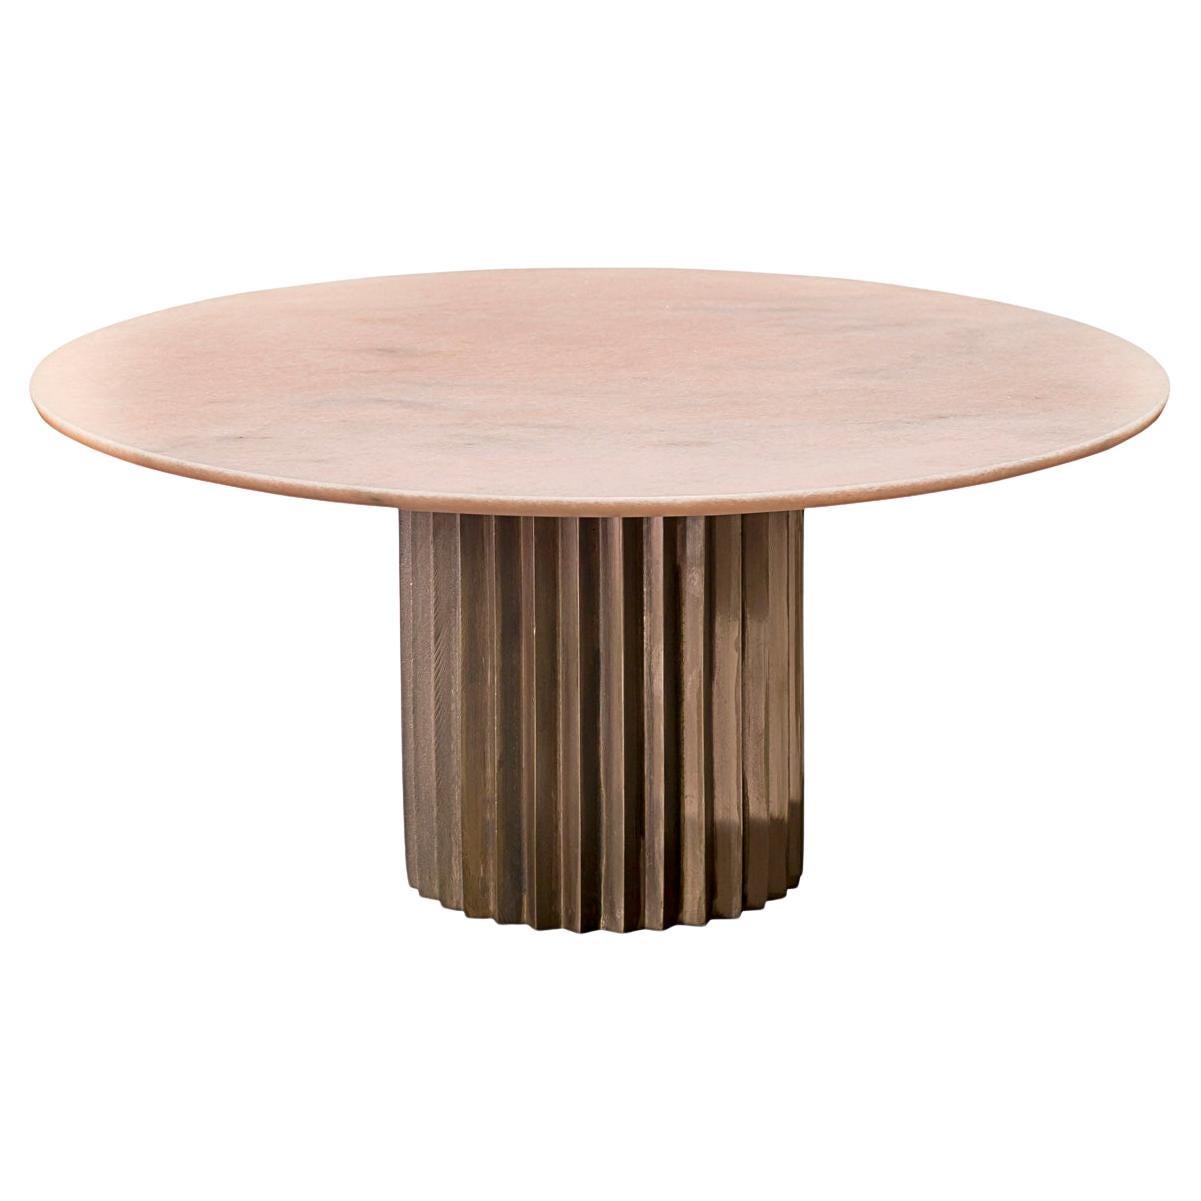 Doris Pink Portugal Marble Round Dining Table by Fred and Juul For Sale